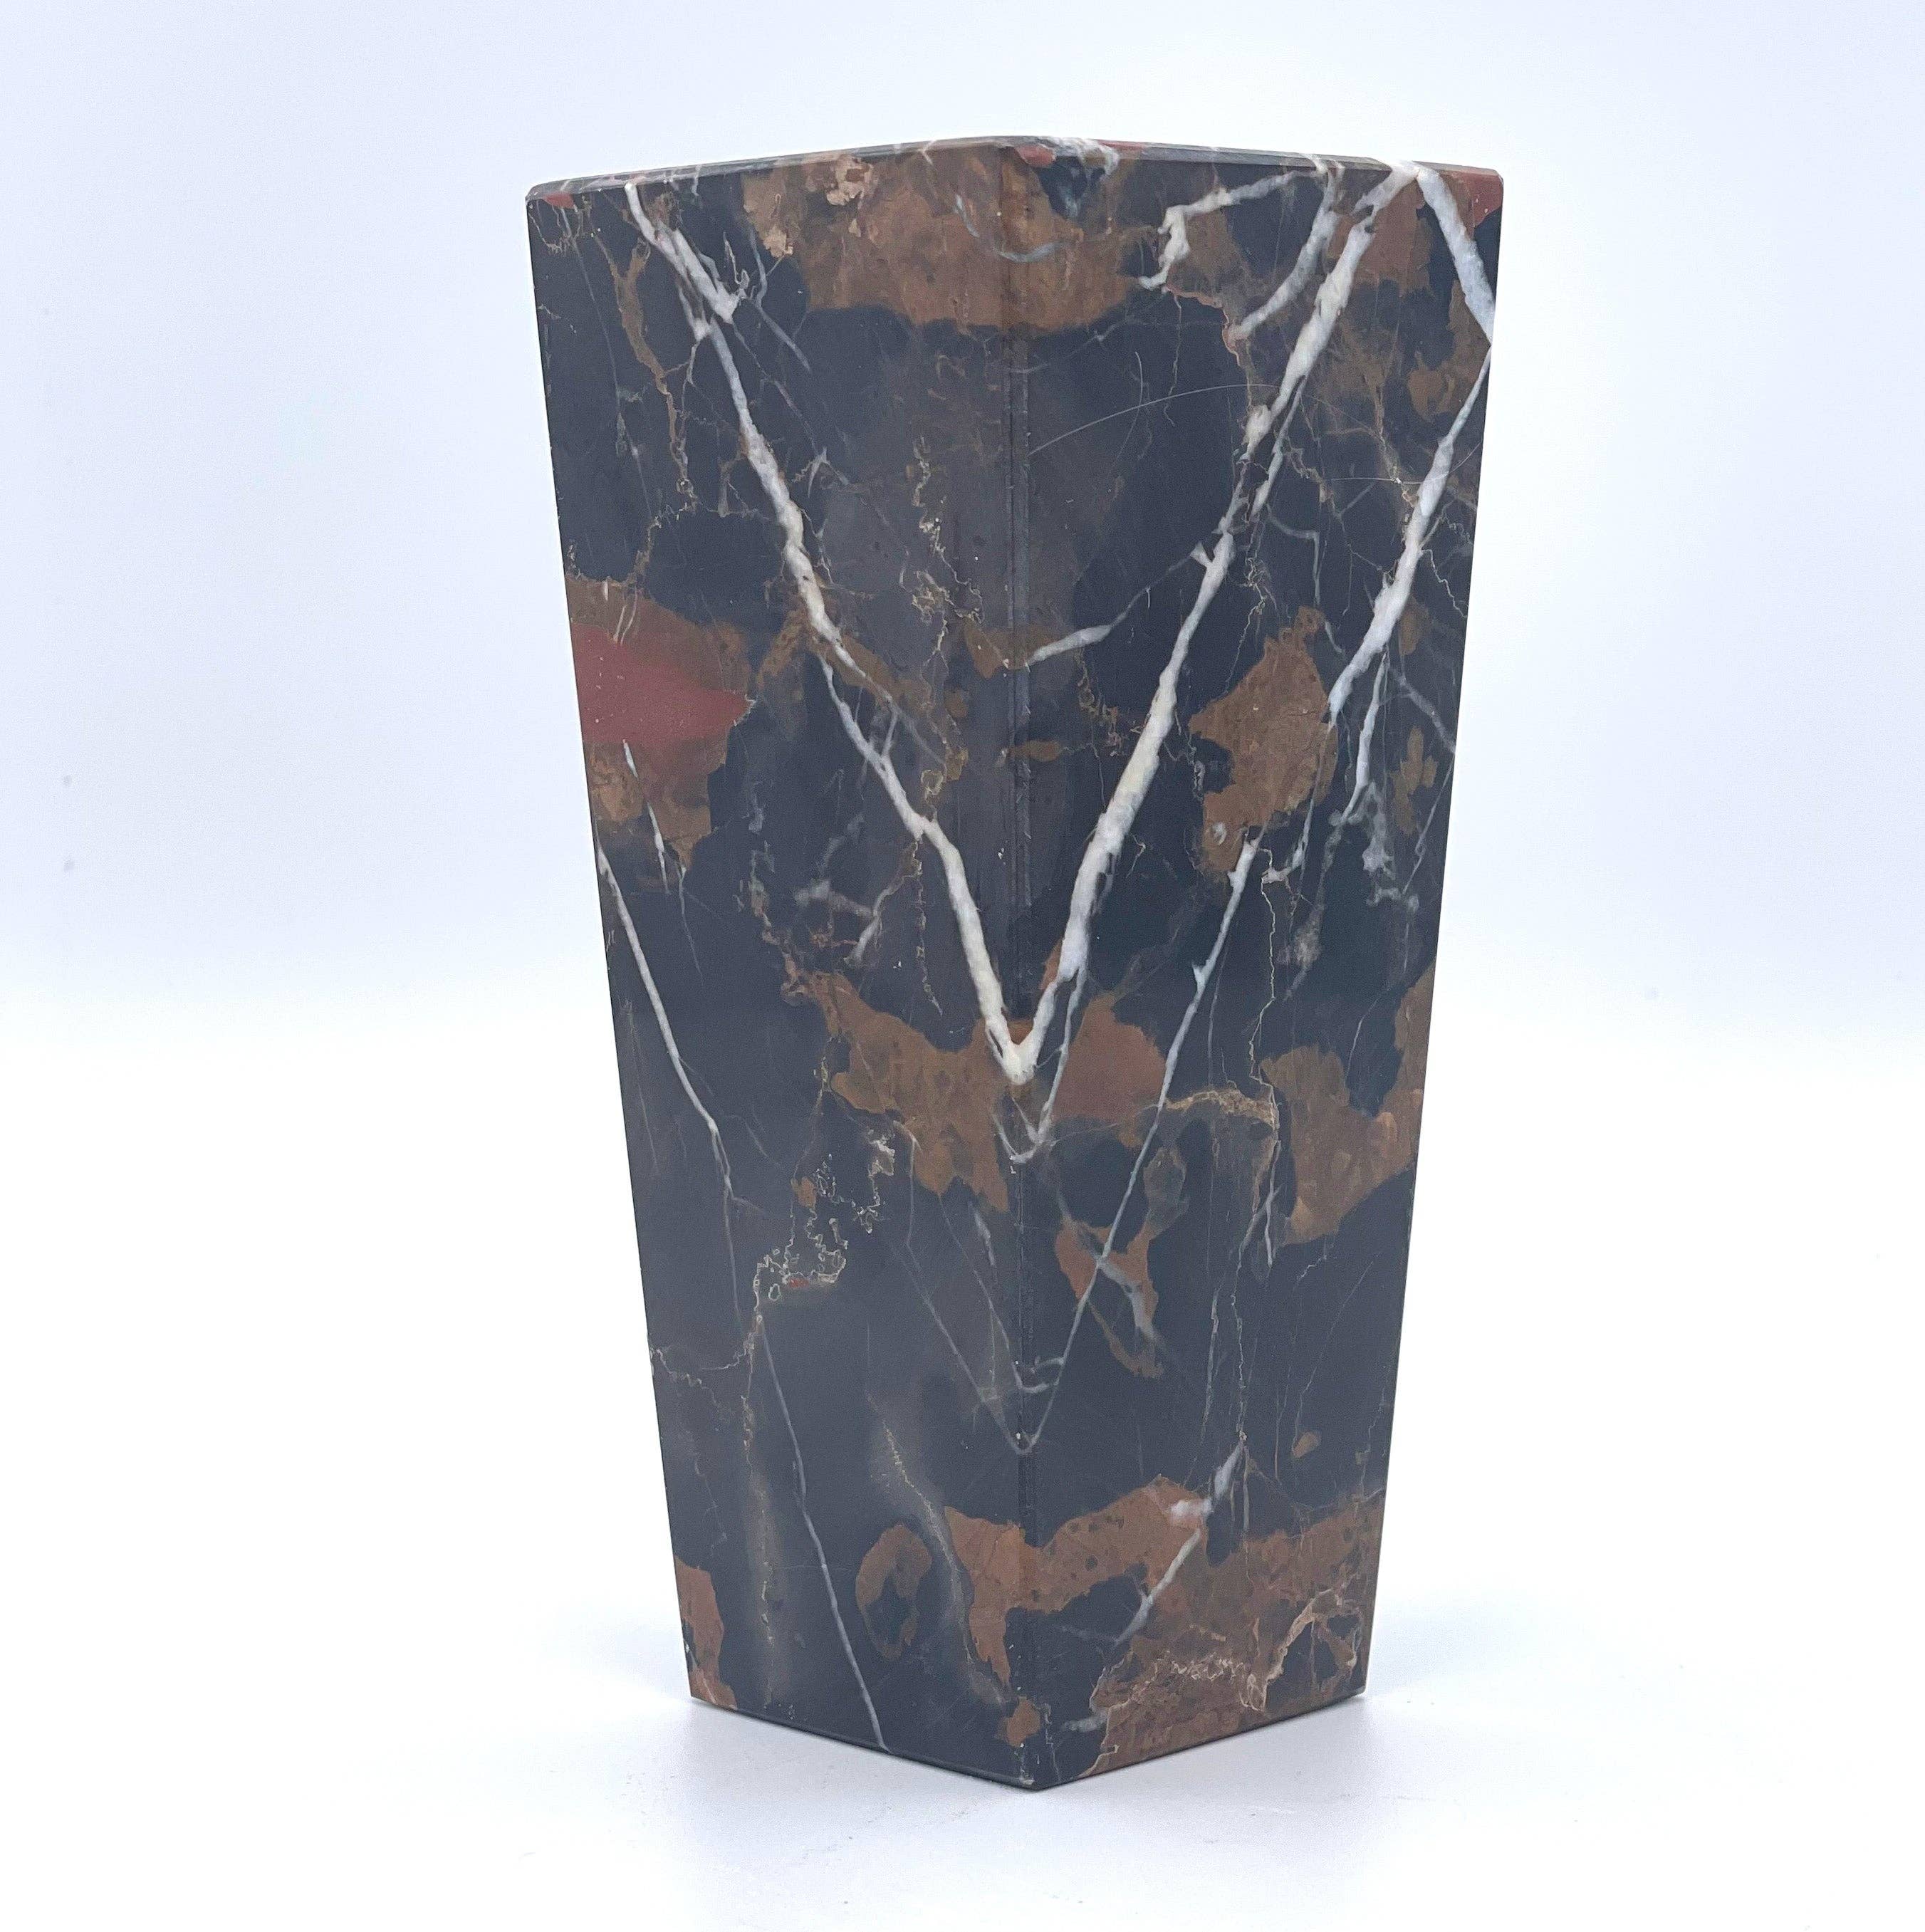 6" Square Vase - Marble and Onyx: Multi-colored Onyx